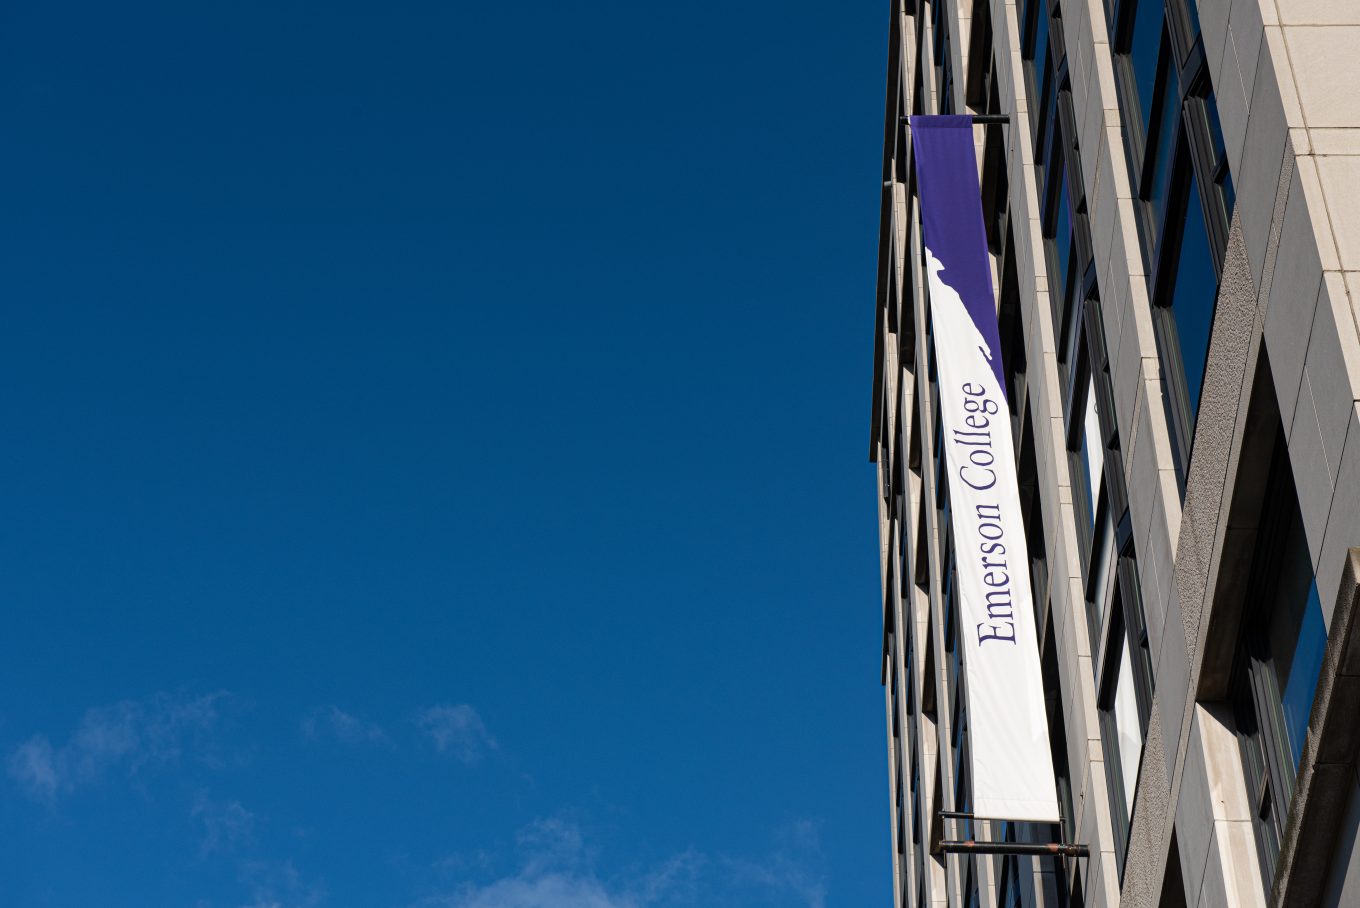 shot of Emerson College building with purple and white banners against a blue sky